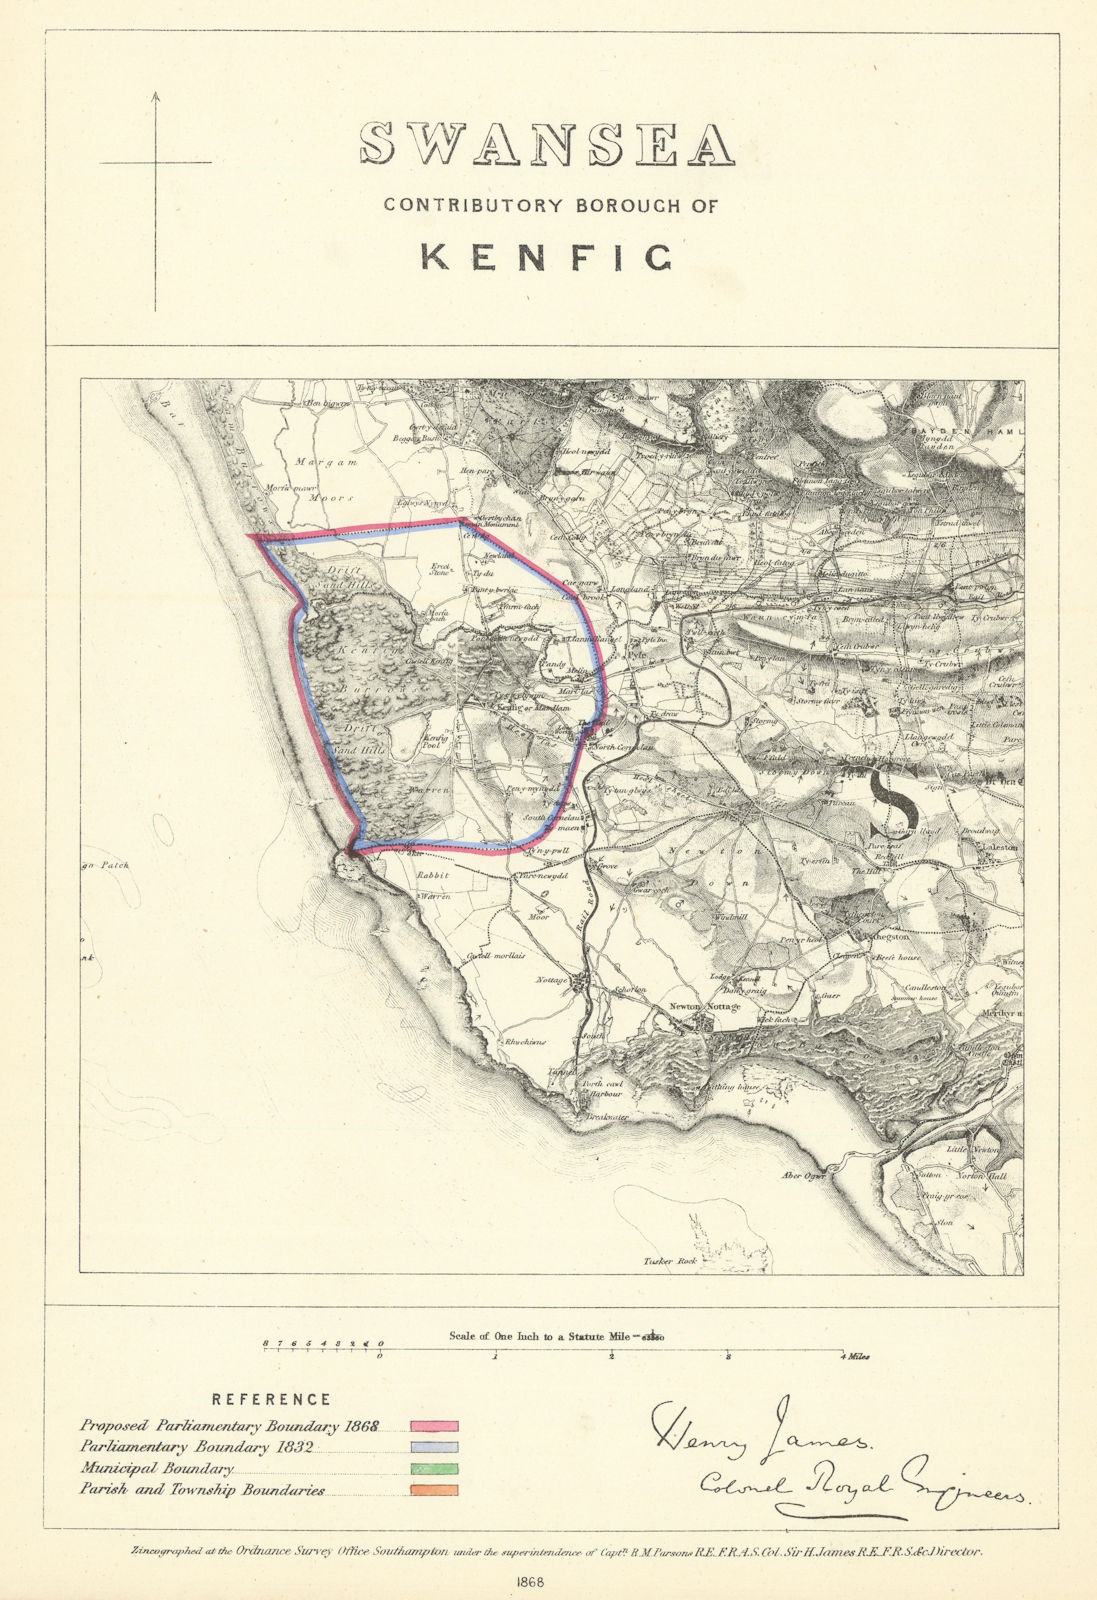 Swansea Contributory Borough of Kenfig. JAMES. Boundary Commission 1868 map